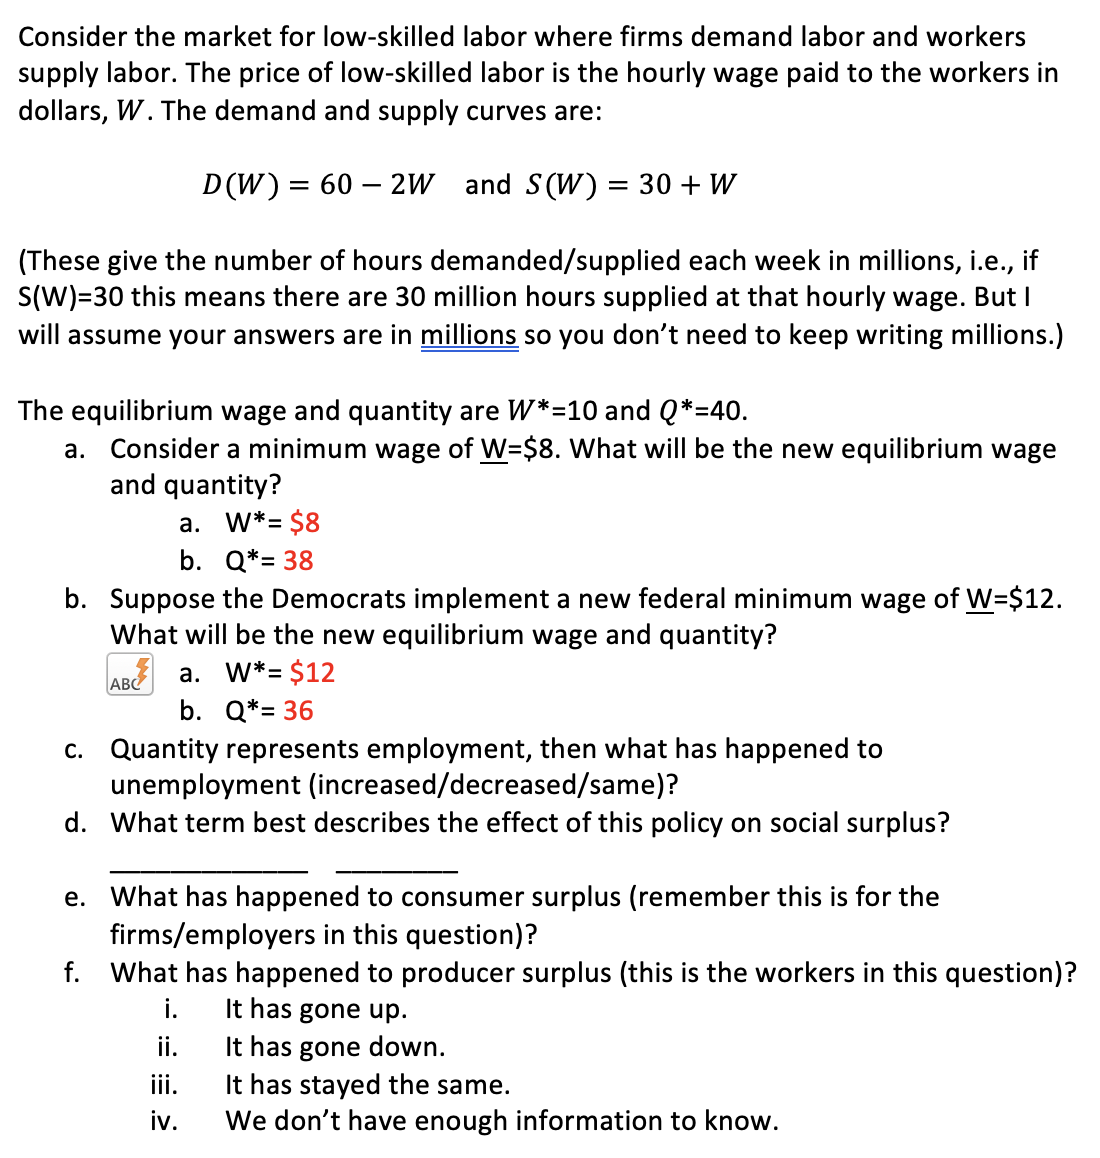 Consider the market for low-skilled labor where firms demand labor and workers
supply labor. The price of low-skilled labor is the hourly wage paid to the workers in
dollars, W. The demand and supply curves are:
D (W)= 60 – 2W and S(W) = 30 + W
(These give the number of hours demanded/supplied each week in millions, i.e., if
S(W)=30 this means there are 30 million hours supplied at that hourly wage. But I
will assume your answers are in millions so you don't need to keep writing millions.)
The equilibrium wage and quantity are W*=10 and Q*=40.
a. Consider a minimum wage of W=$8. What will be the new equilibrium wage
and quantity?
a. W*= $8
b. Q*= 38
b. Suppose the Democrats implement a new federal minimum wage of W=$12.
What will be the new equilibrium wage and quantity?
ABC a. W*= $12
b. Q*= 36
c. Quantity represents employment, then what has happened to
unemployment (increased/decreased/same)?
d. What term best describes the effect of this policy on social surplus?
e. What has happened to consumer surplus (remember this is for the
firms/employers in this question)?
What has happened to producer surplus (this is the workers in this question)?
f.
It has gone up.
It has gone down.
It has stayed the same.
We don't have enough information to know.
i.
i.
iii.
iv.
